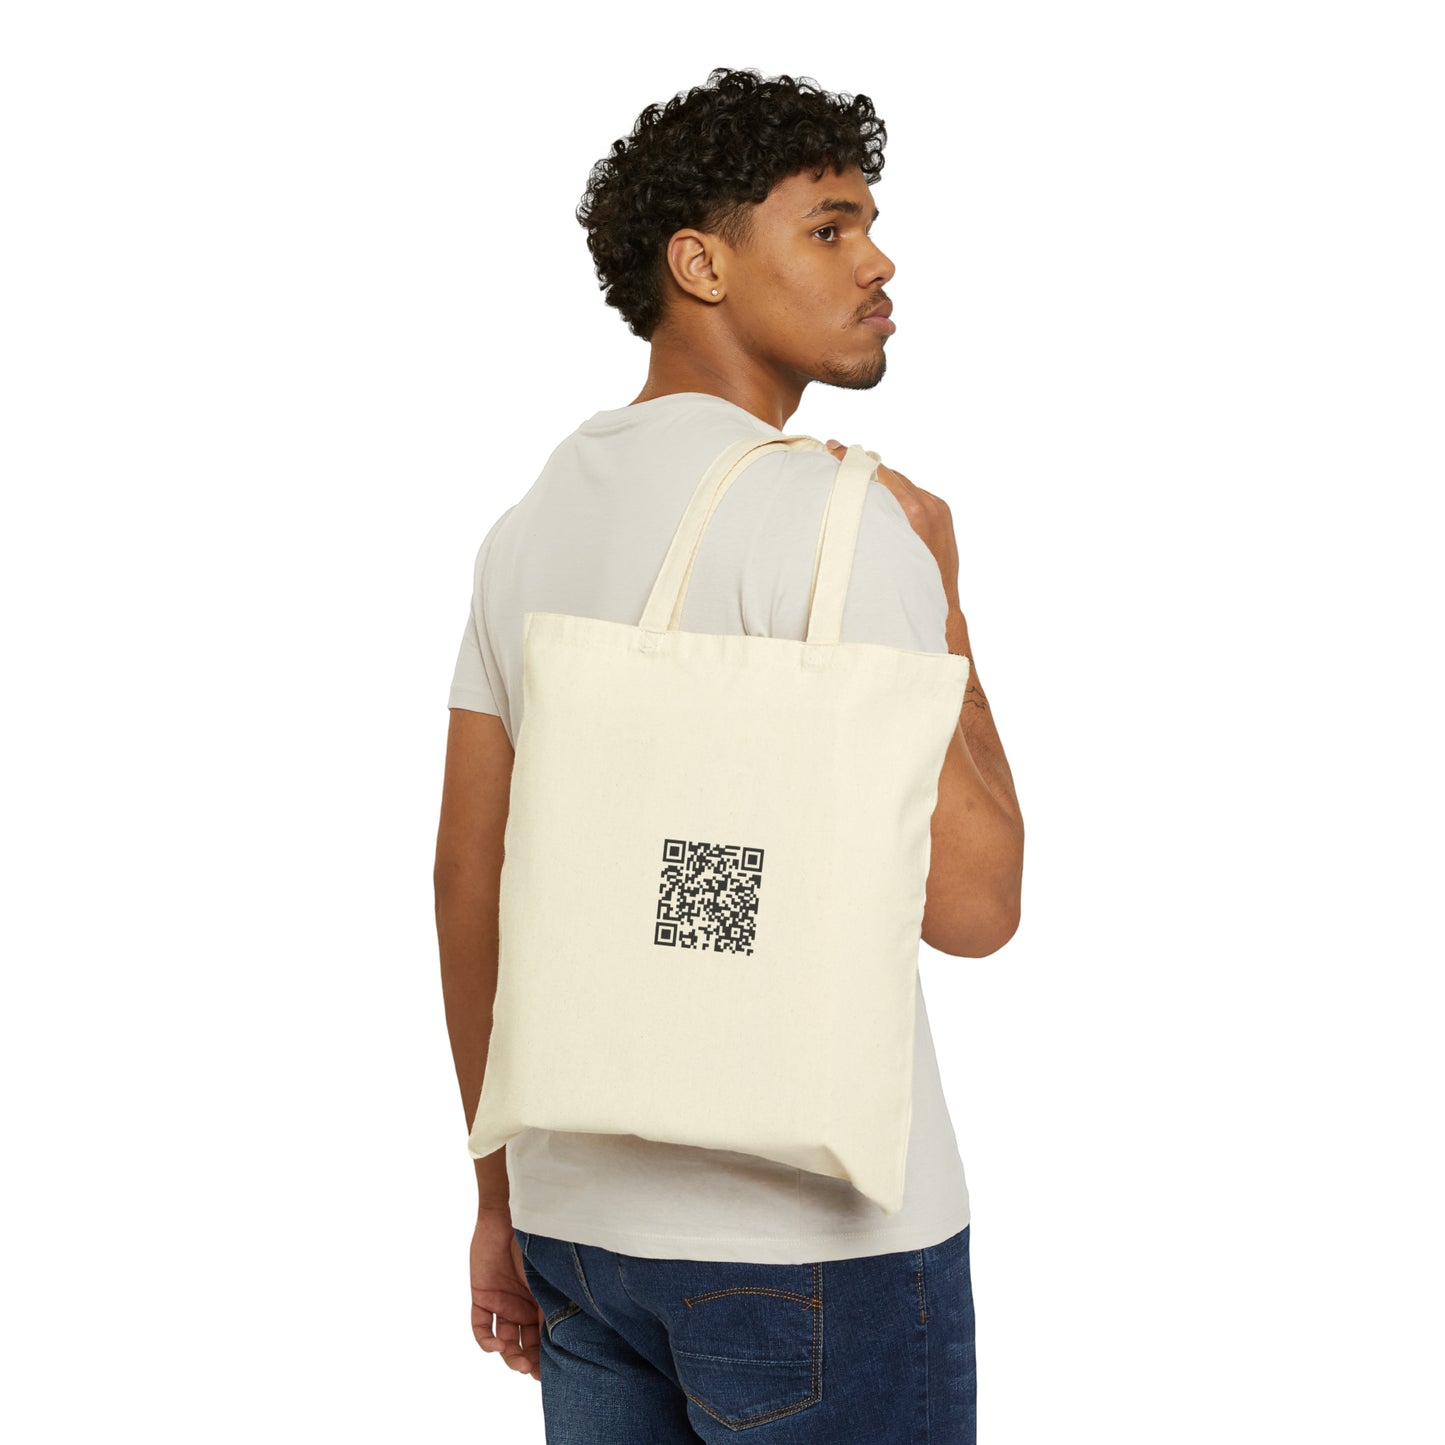 The Tomb - Cotton Canvas Tote Bag